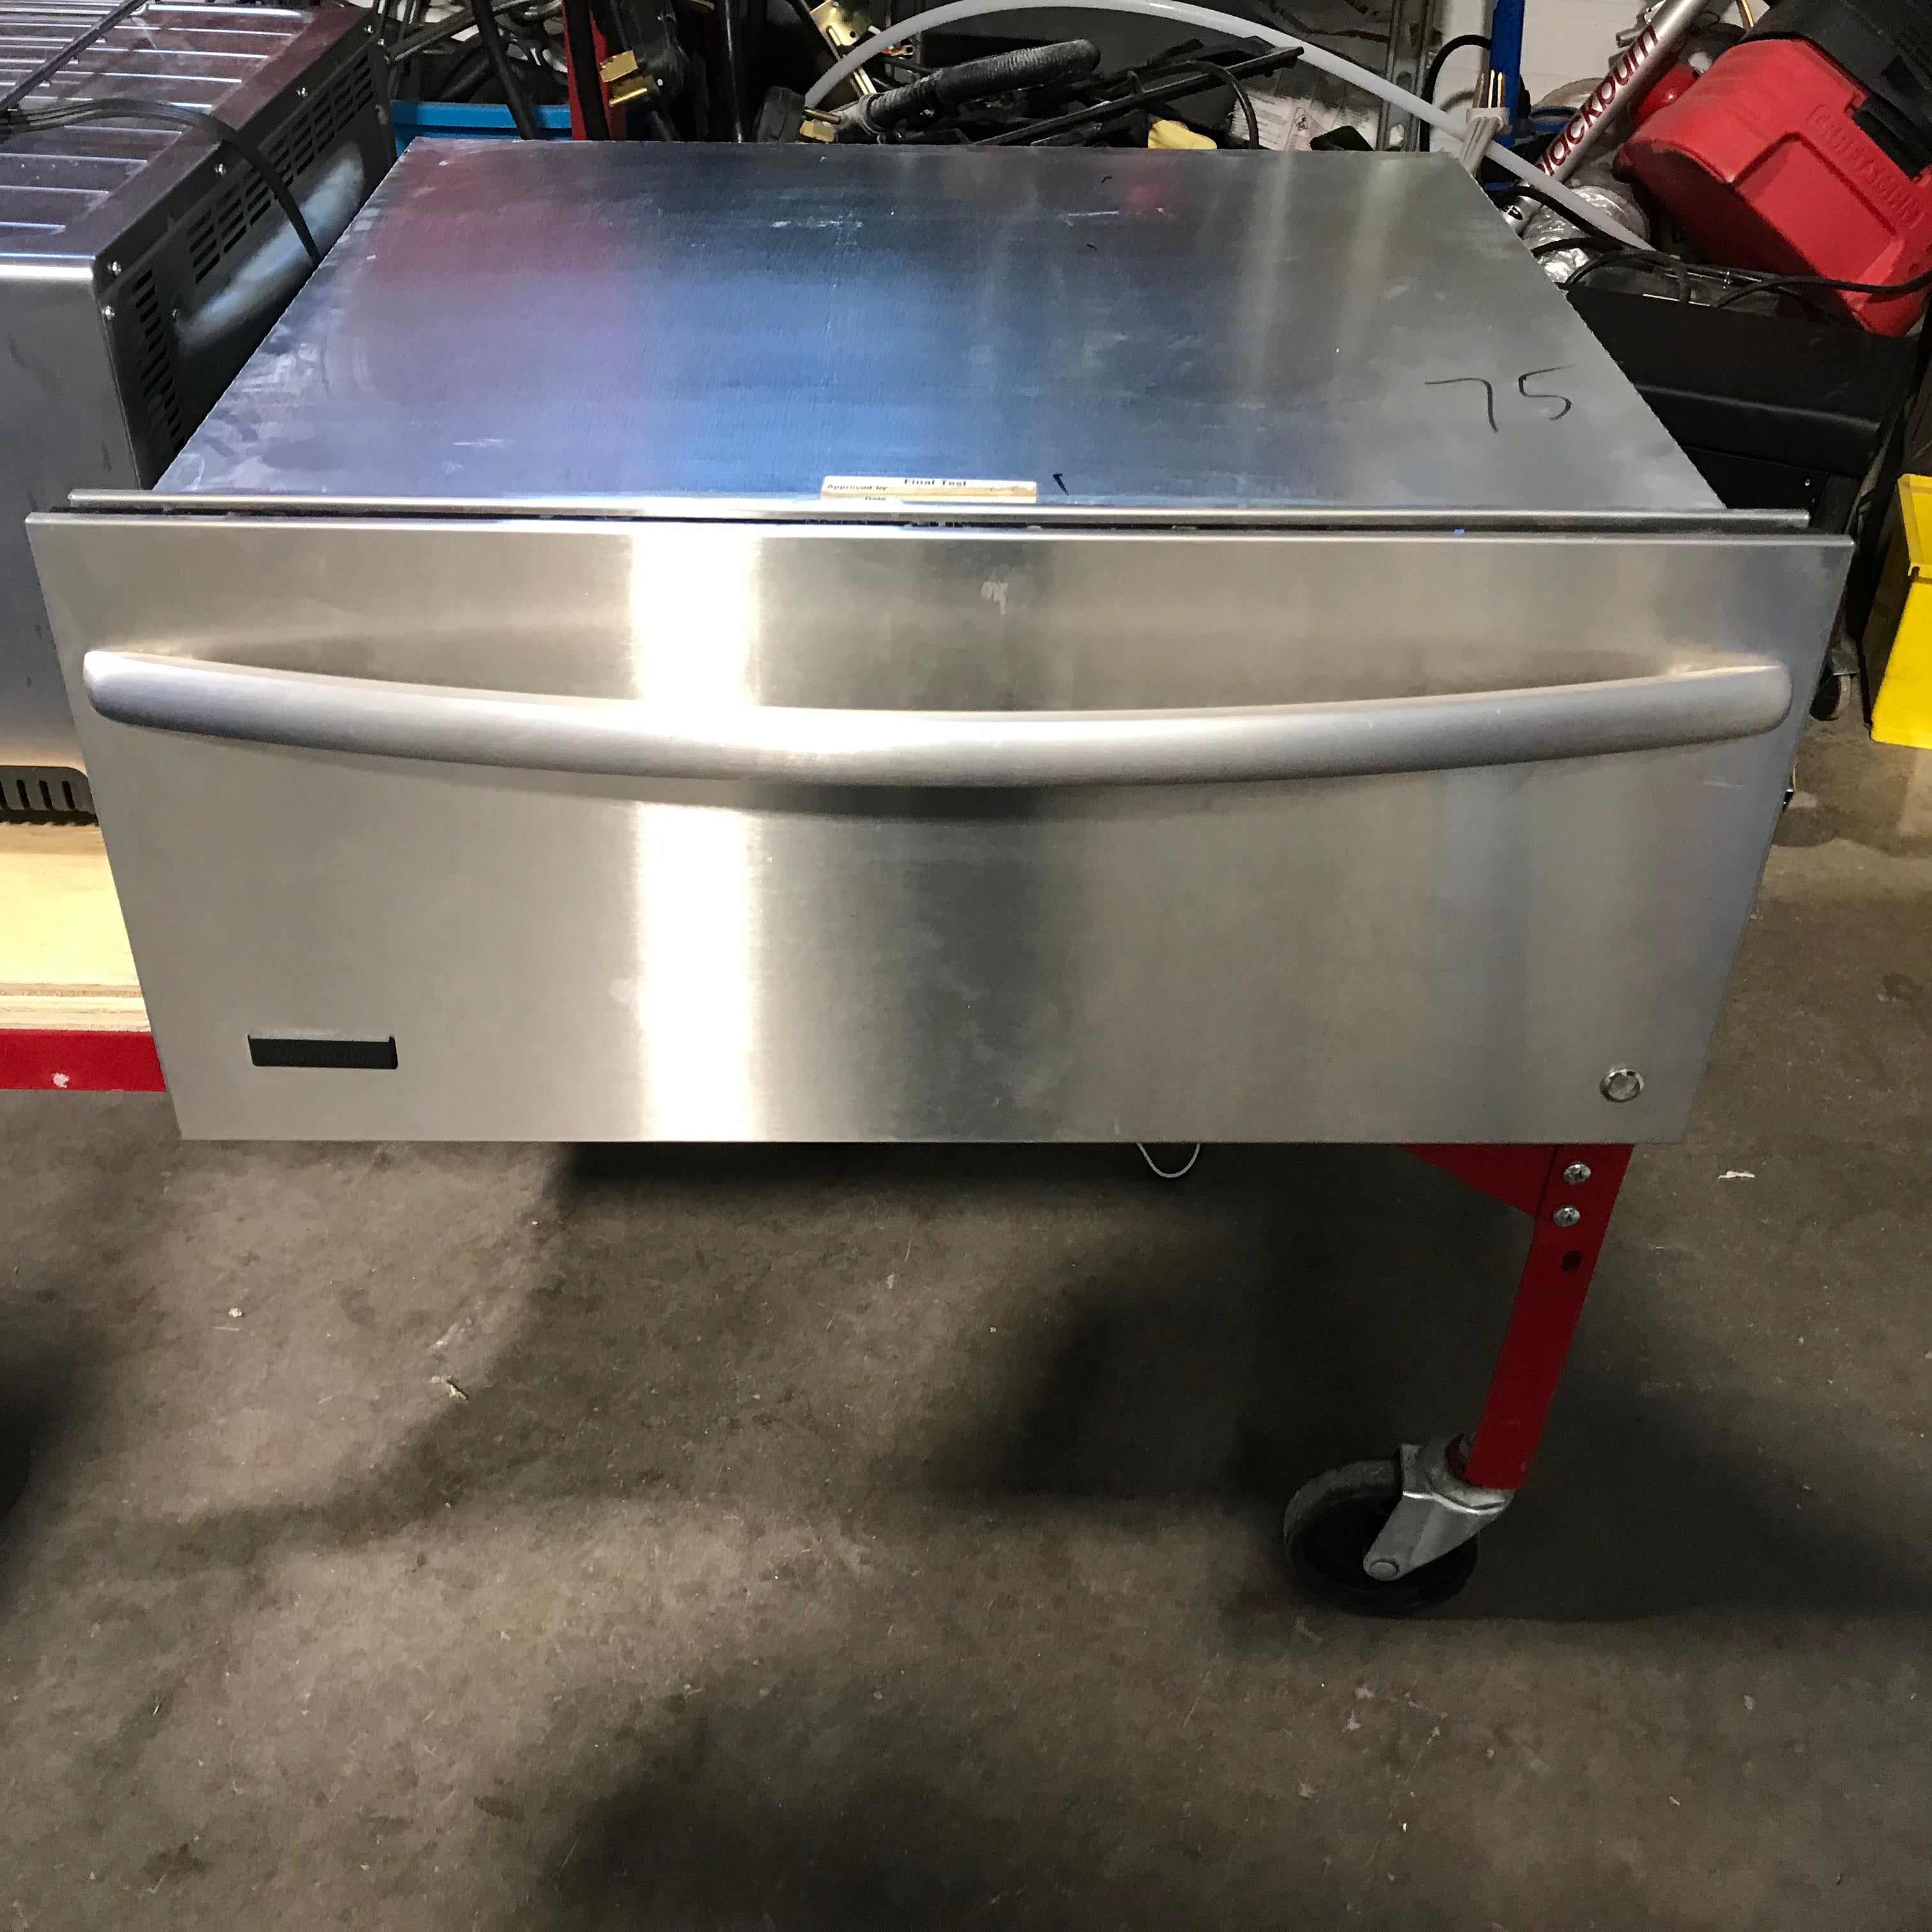 23.5"x 23"x 10.5" Thermador Stainless Steel Warming Drawer